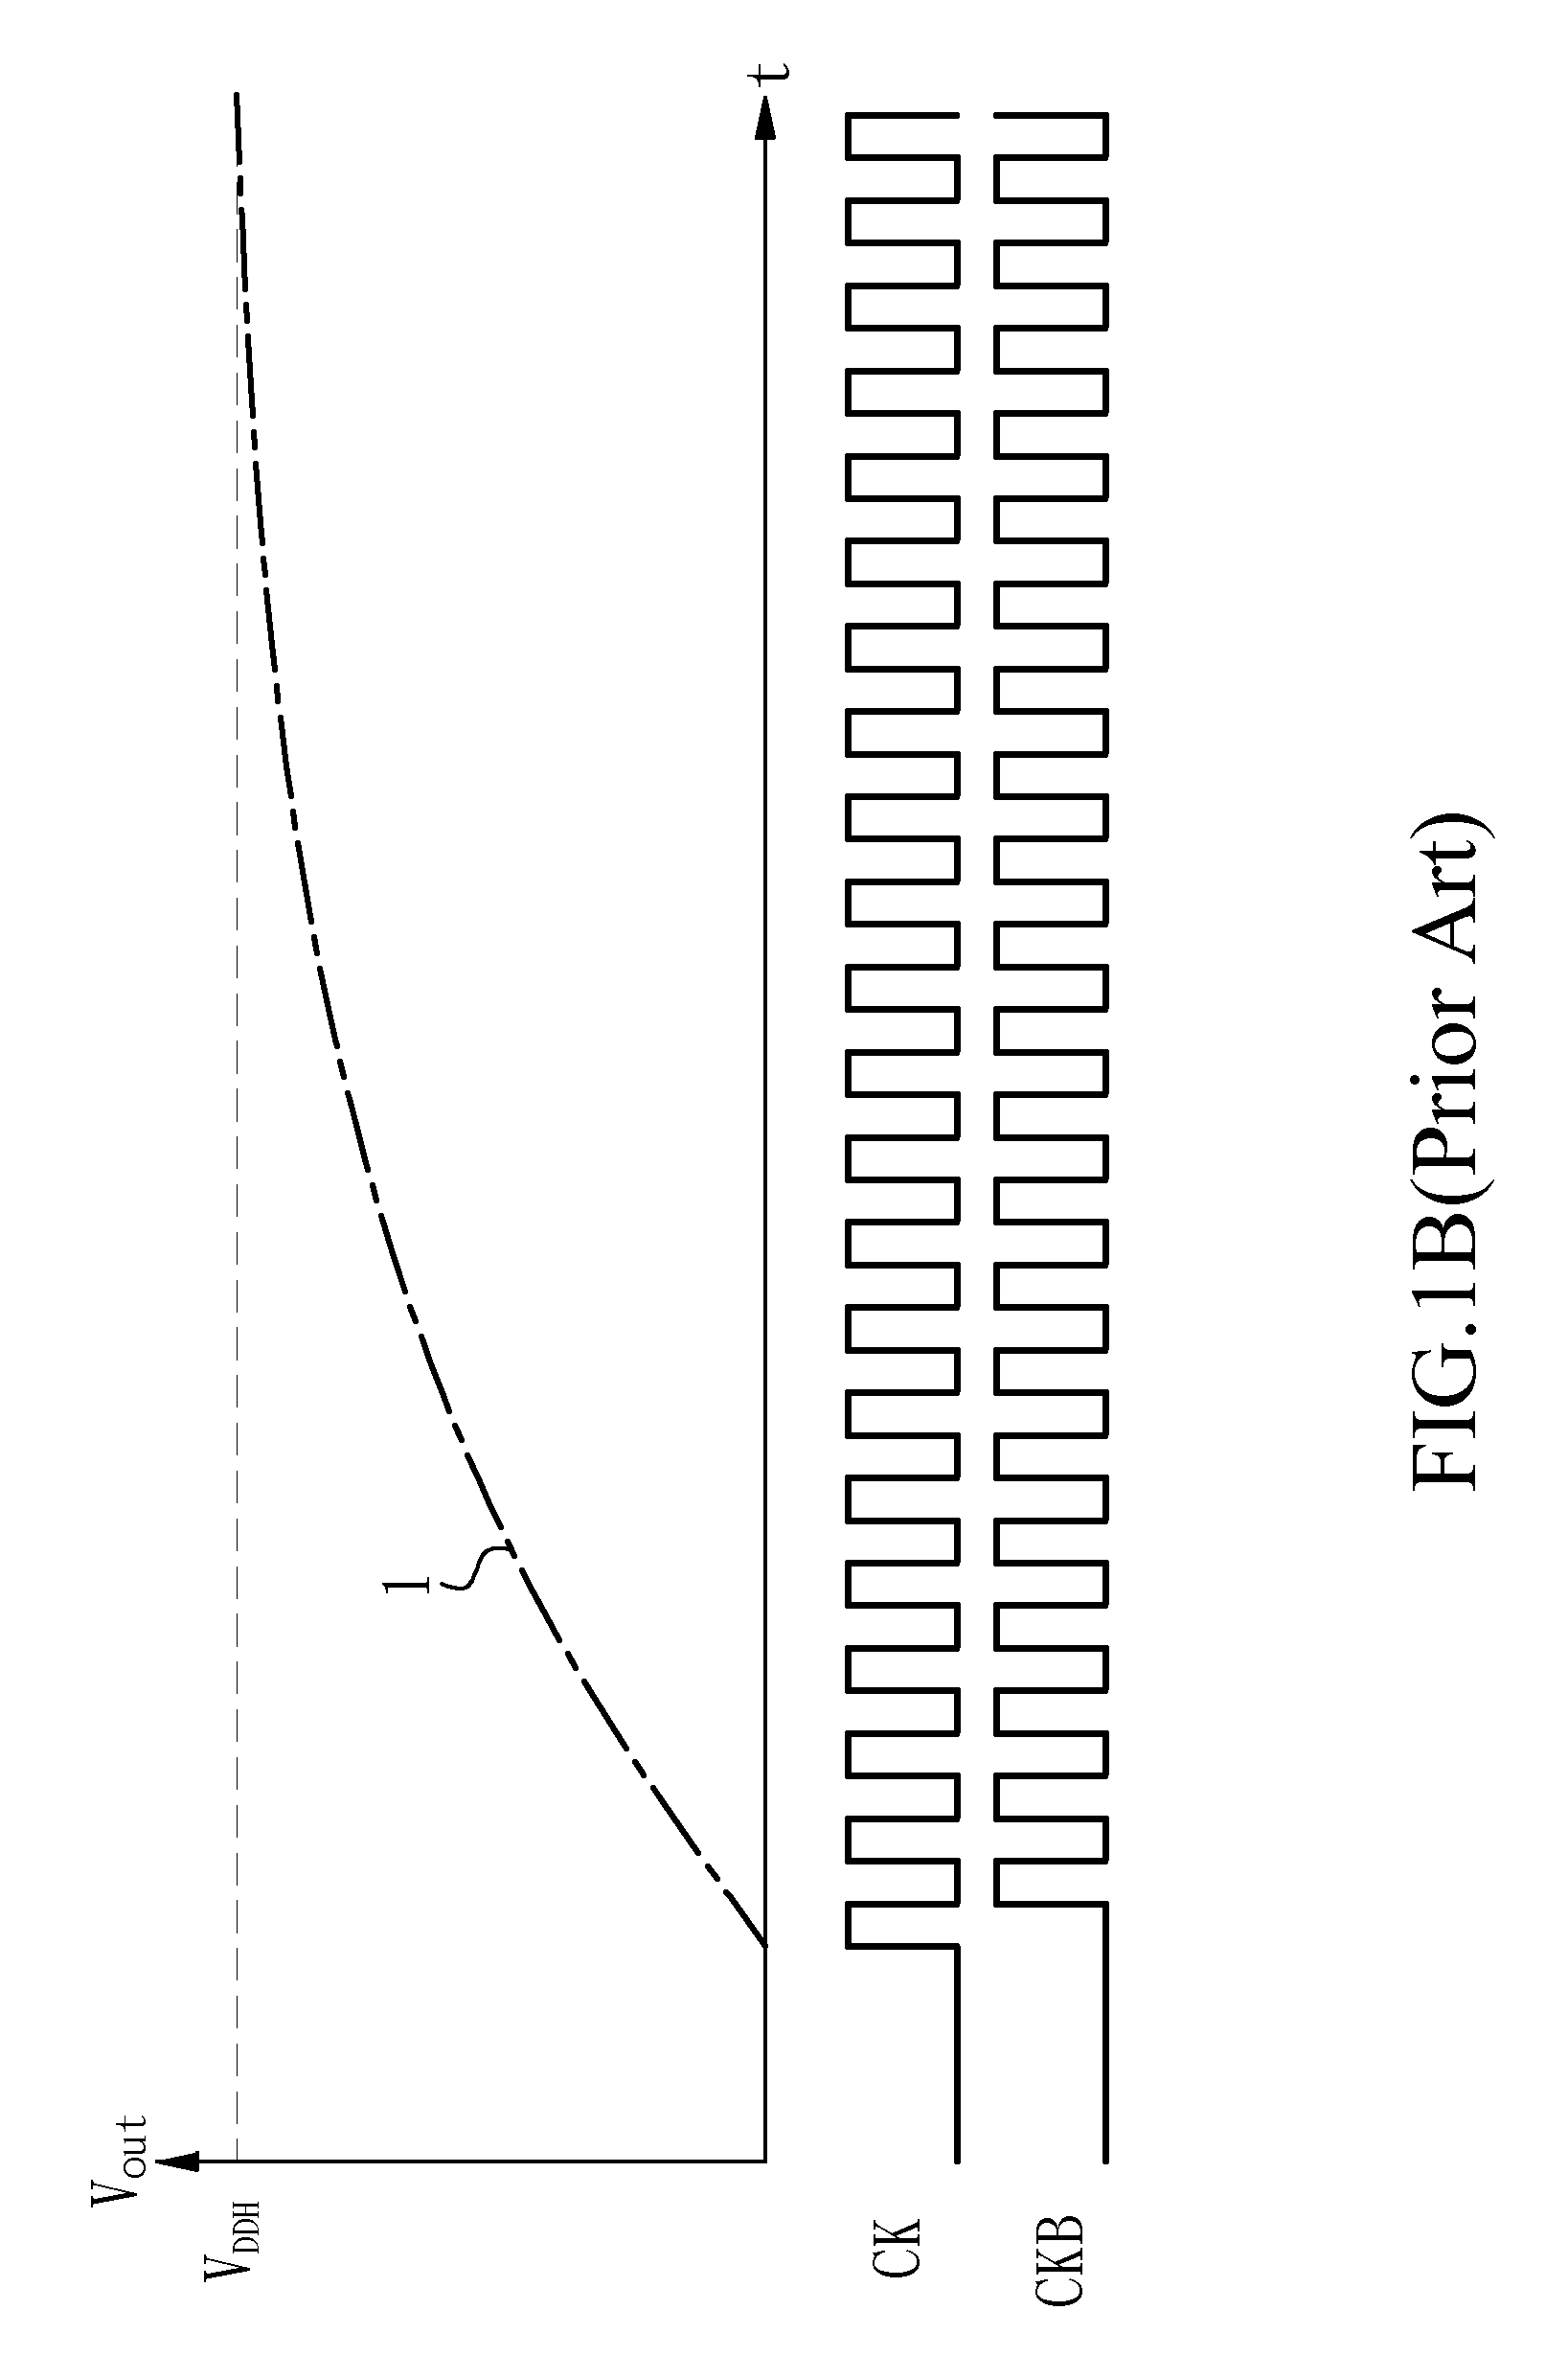 Power management device of a touchable control system